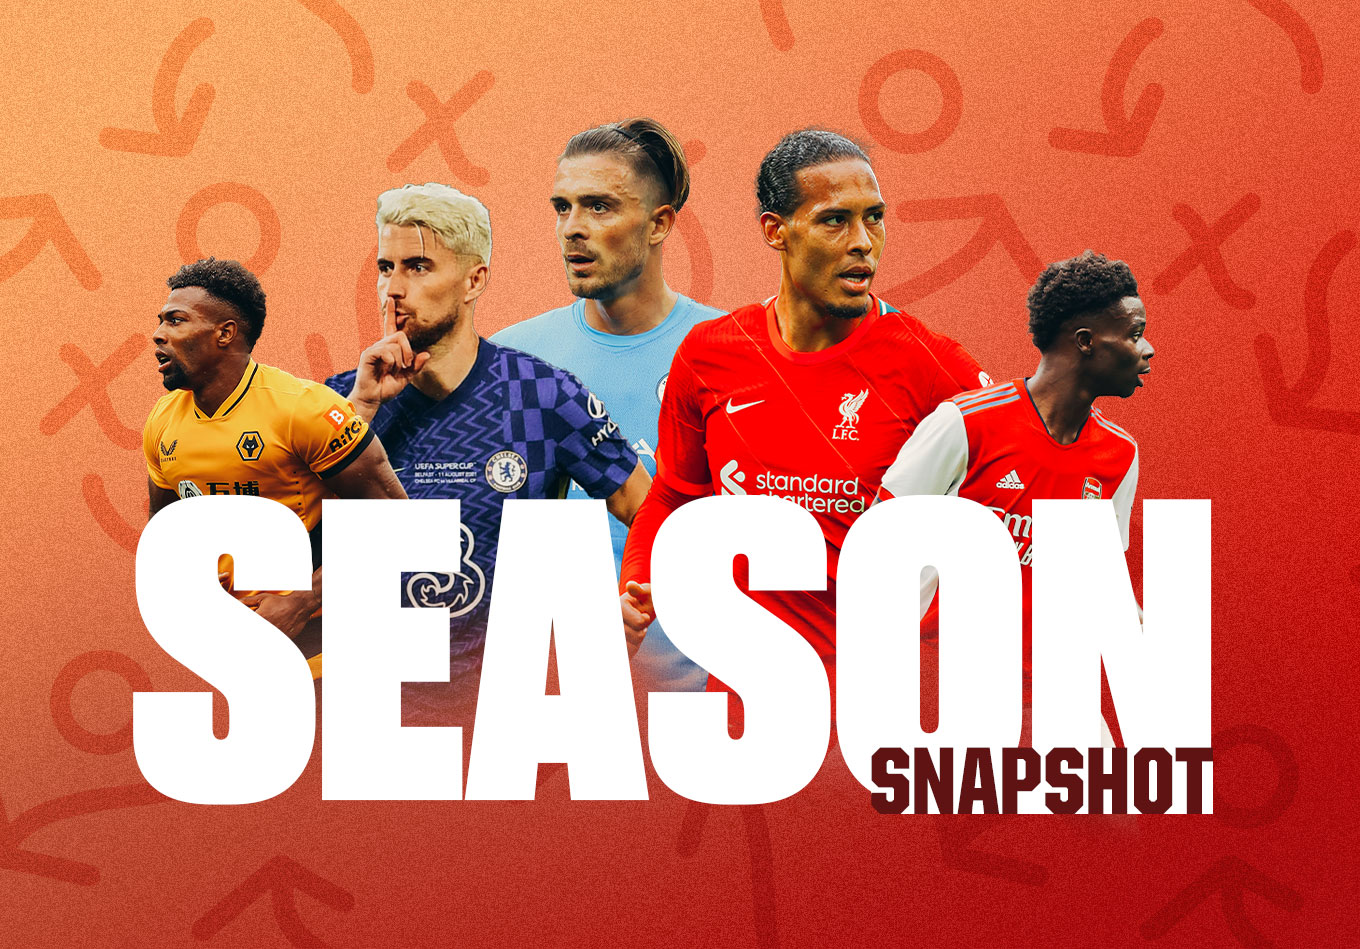 Season Snapshot: The Key Analytical Storylines From The Premier League So Far